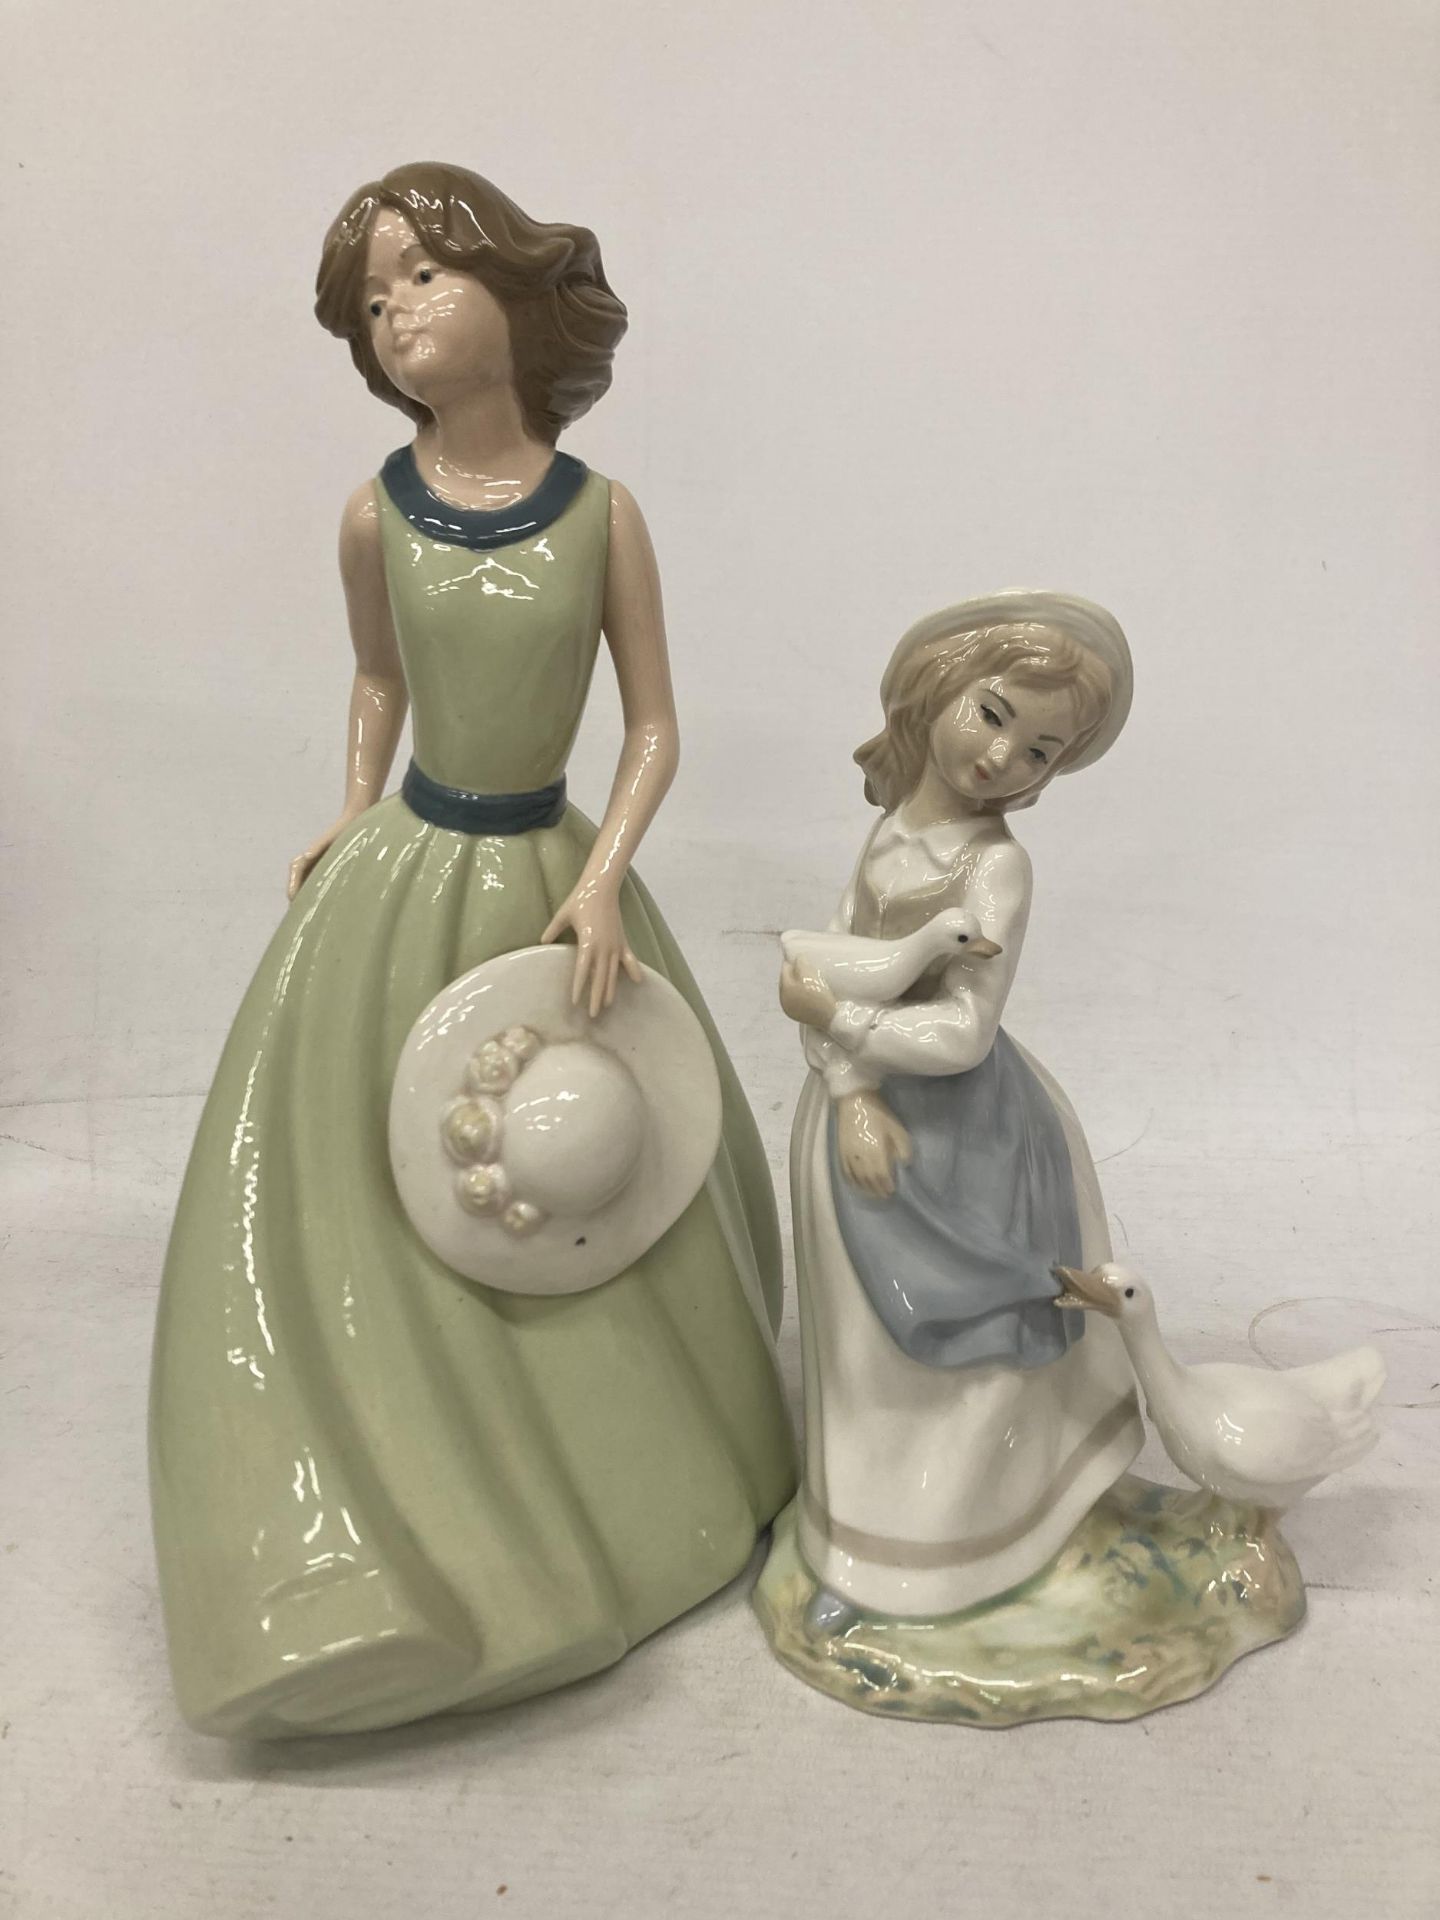 TWO SPANISH LADY FIGURES - TENGRA A GIRL WITH GEESE AND A NADEL FIGURE GIRL HOLDING A HAT